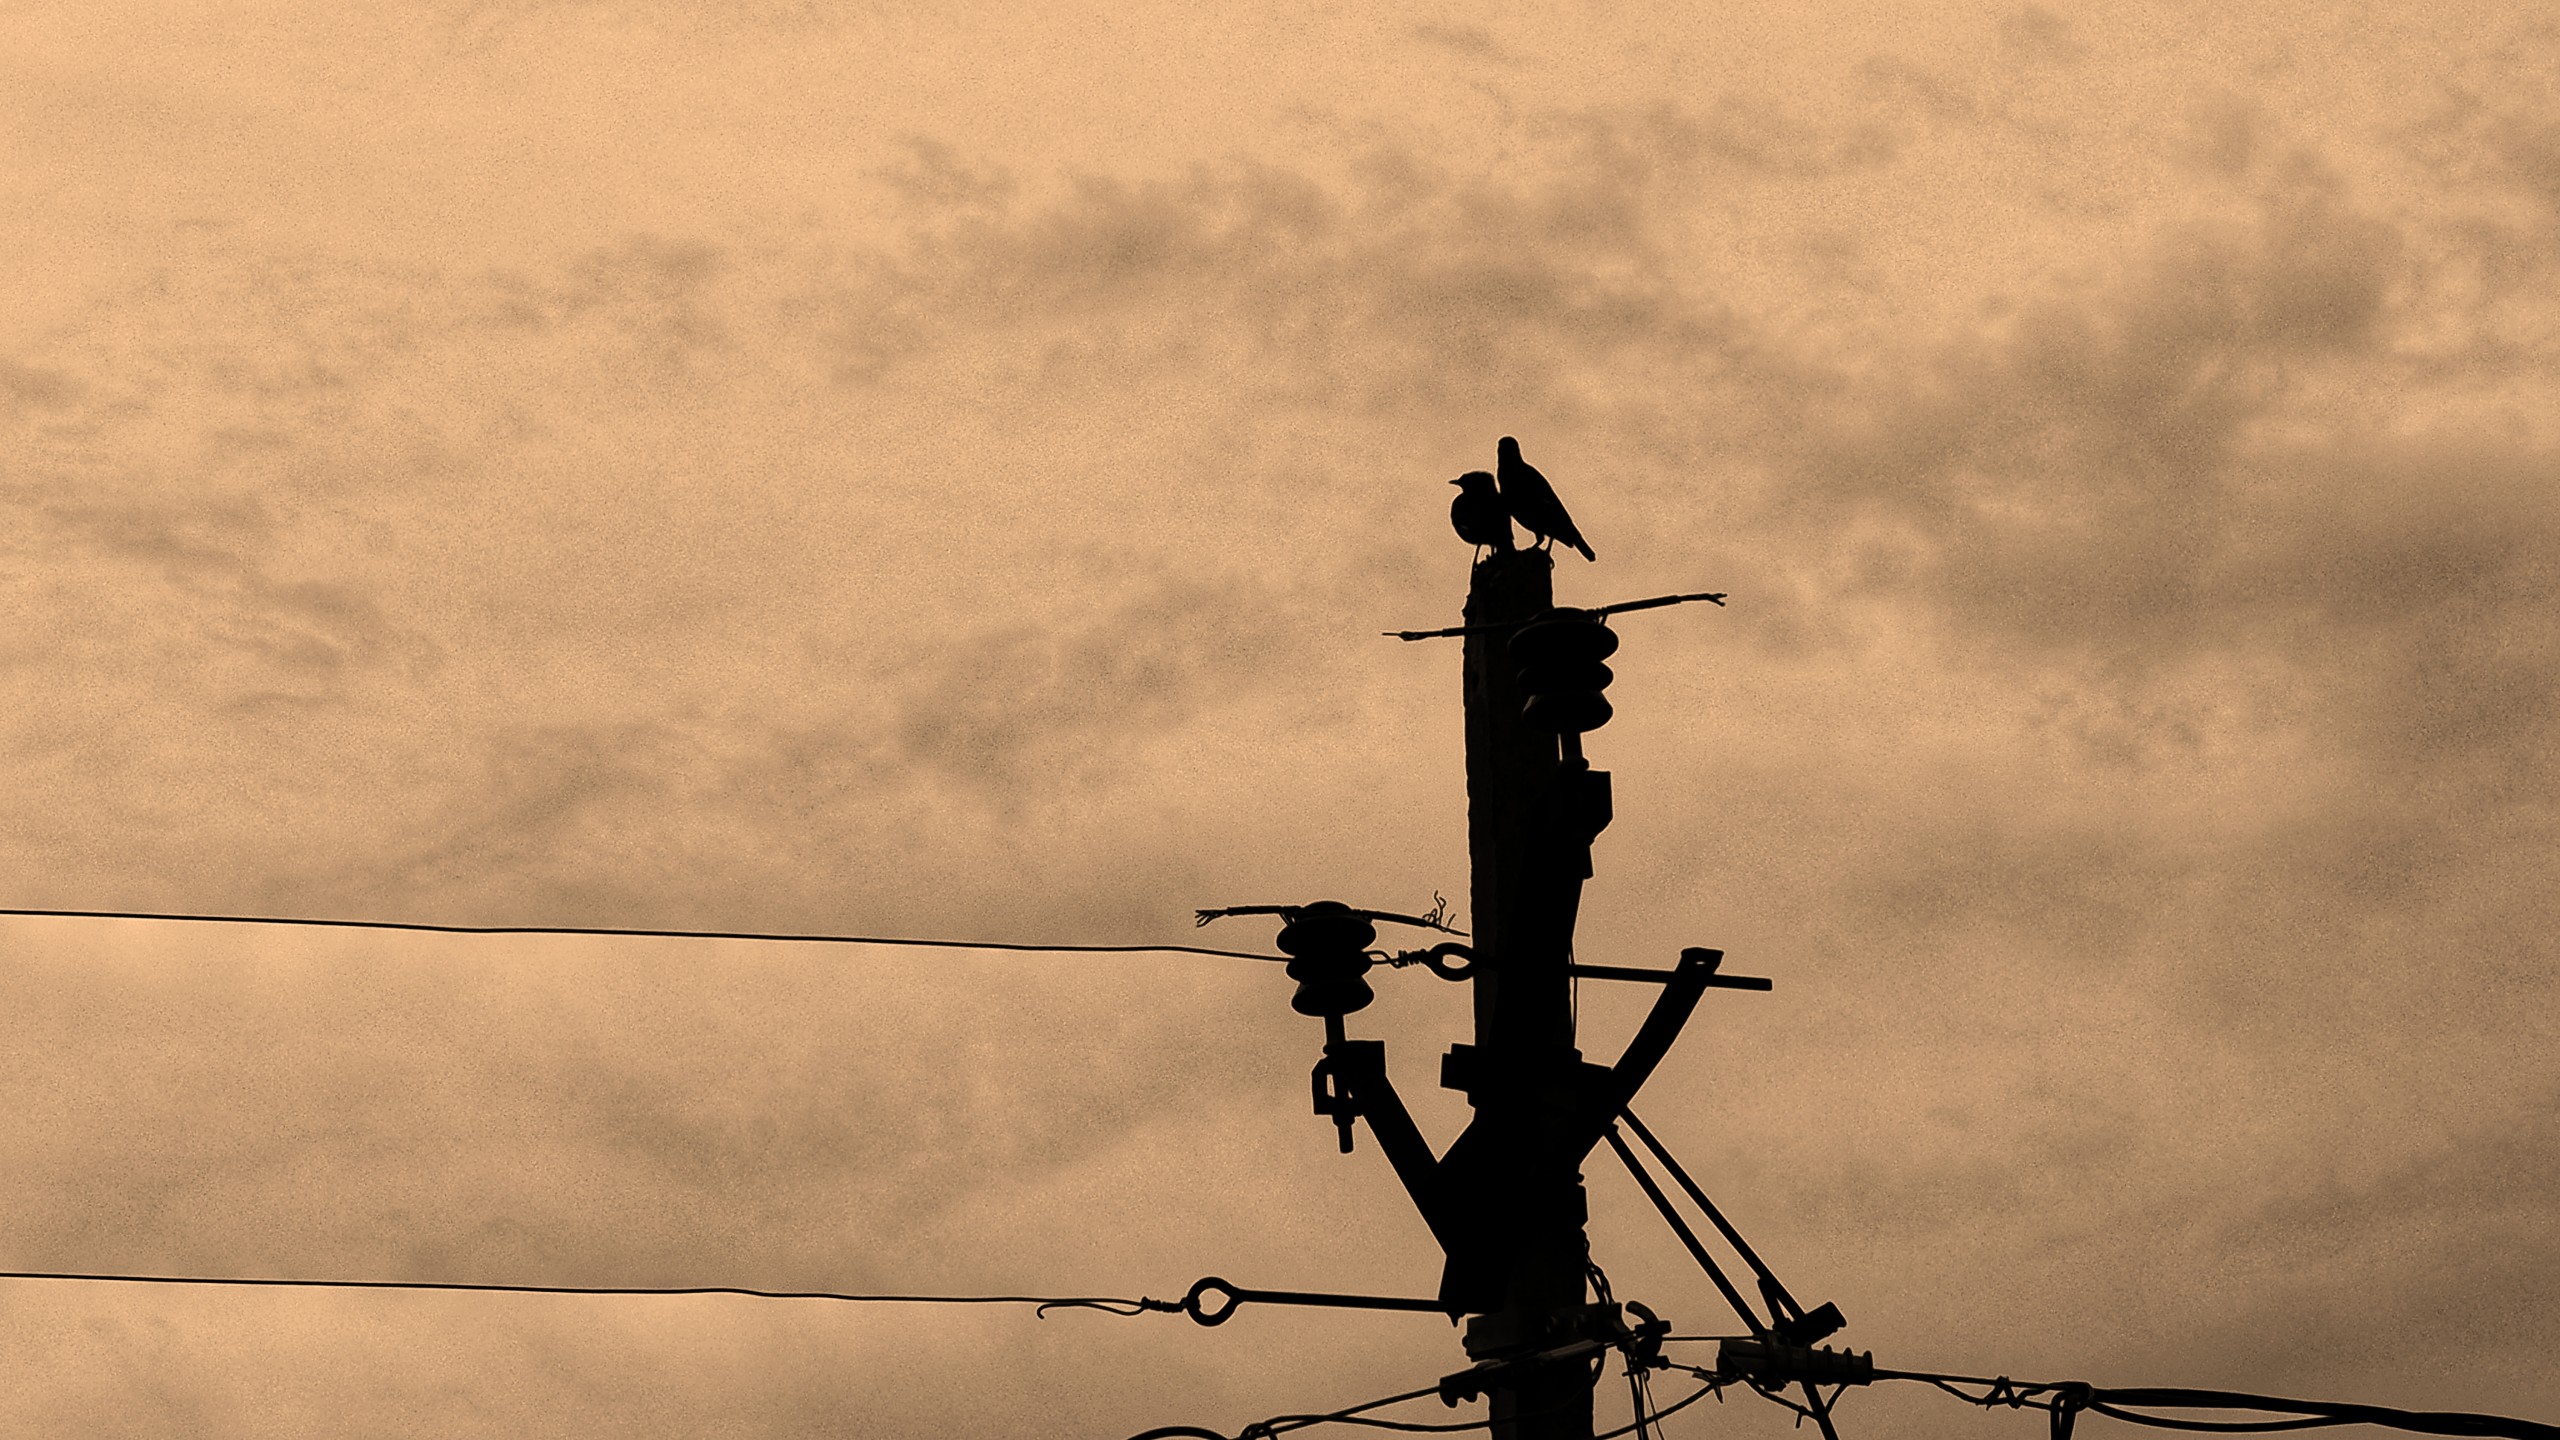 Birds perched on a power line